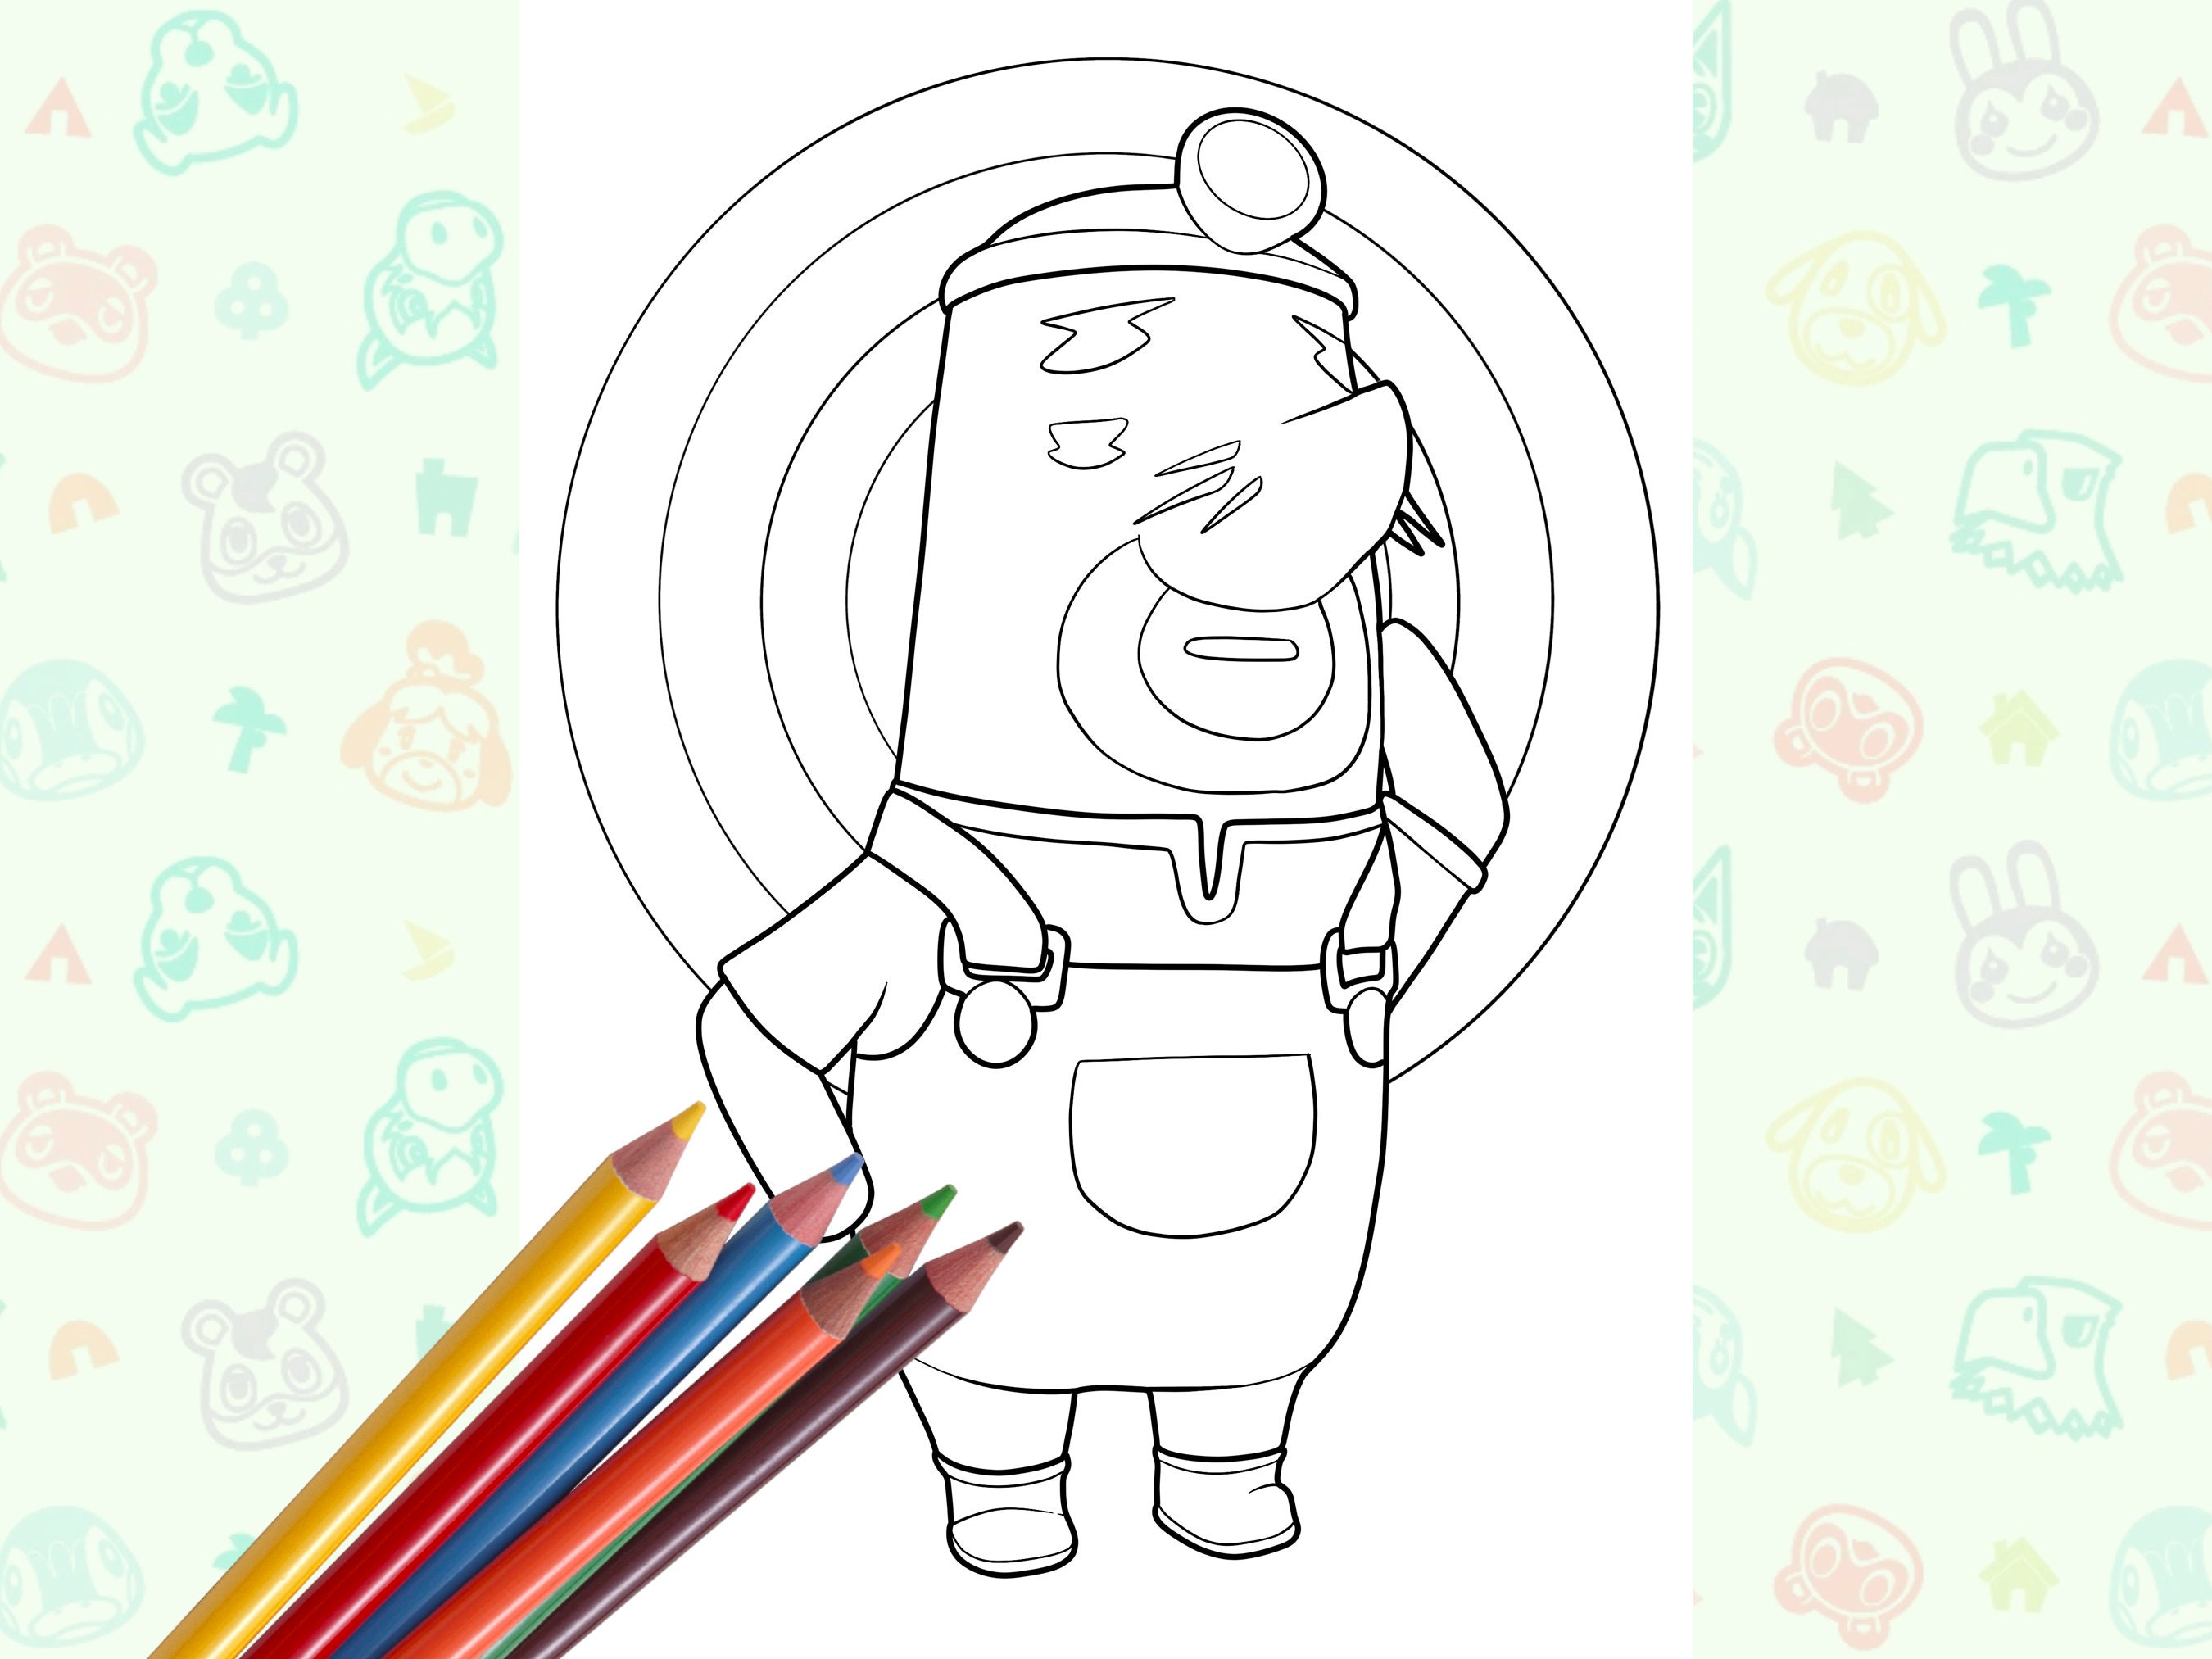 Animal crossing new horizons coloring book coloring pages acnh game activity pages for kids and adults acnh digital printable download